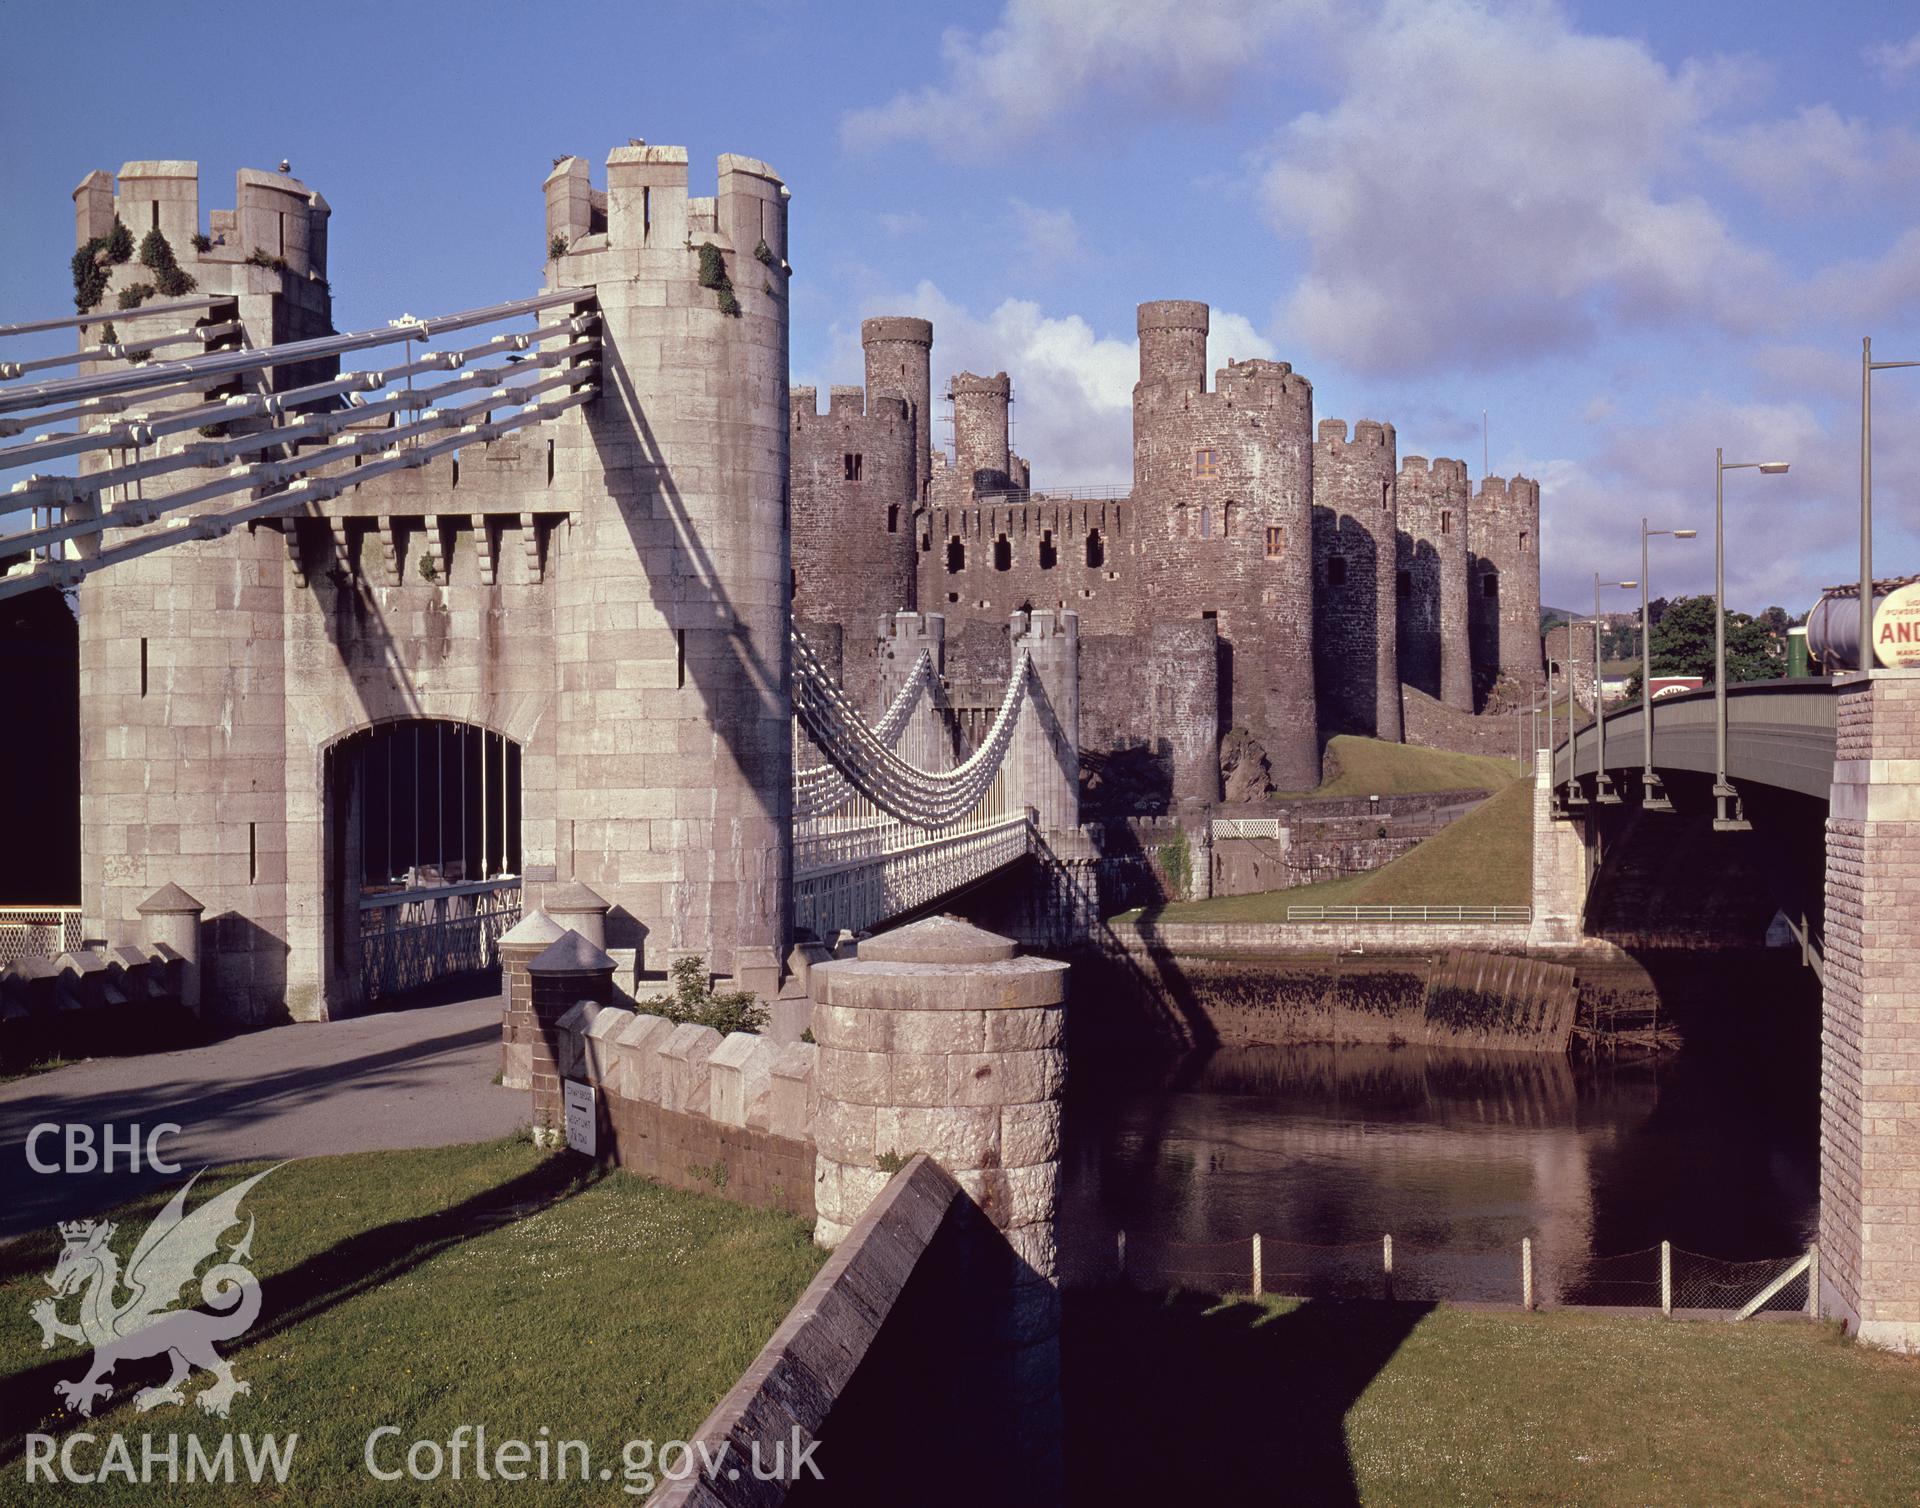 1 colour transparency showing view of Conwy castle, undated; collated by the former Central Office of Information.